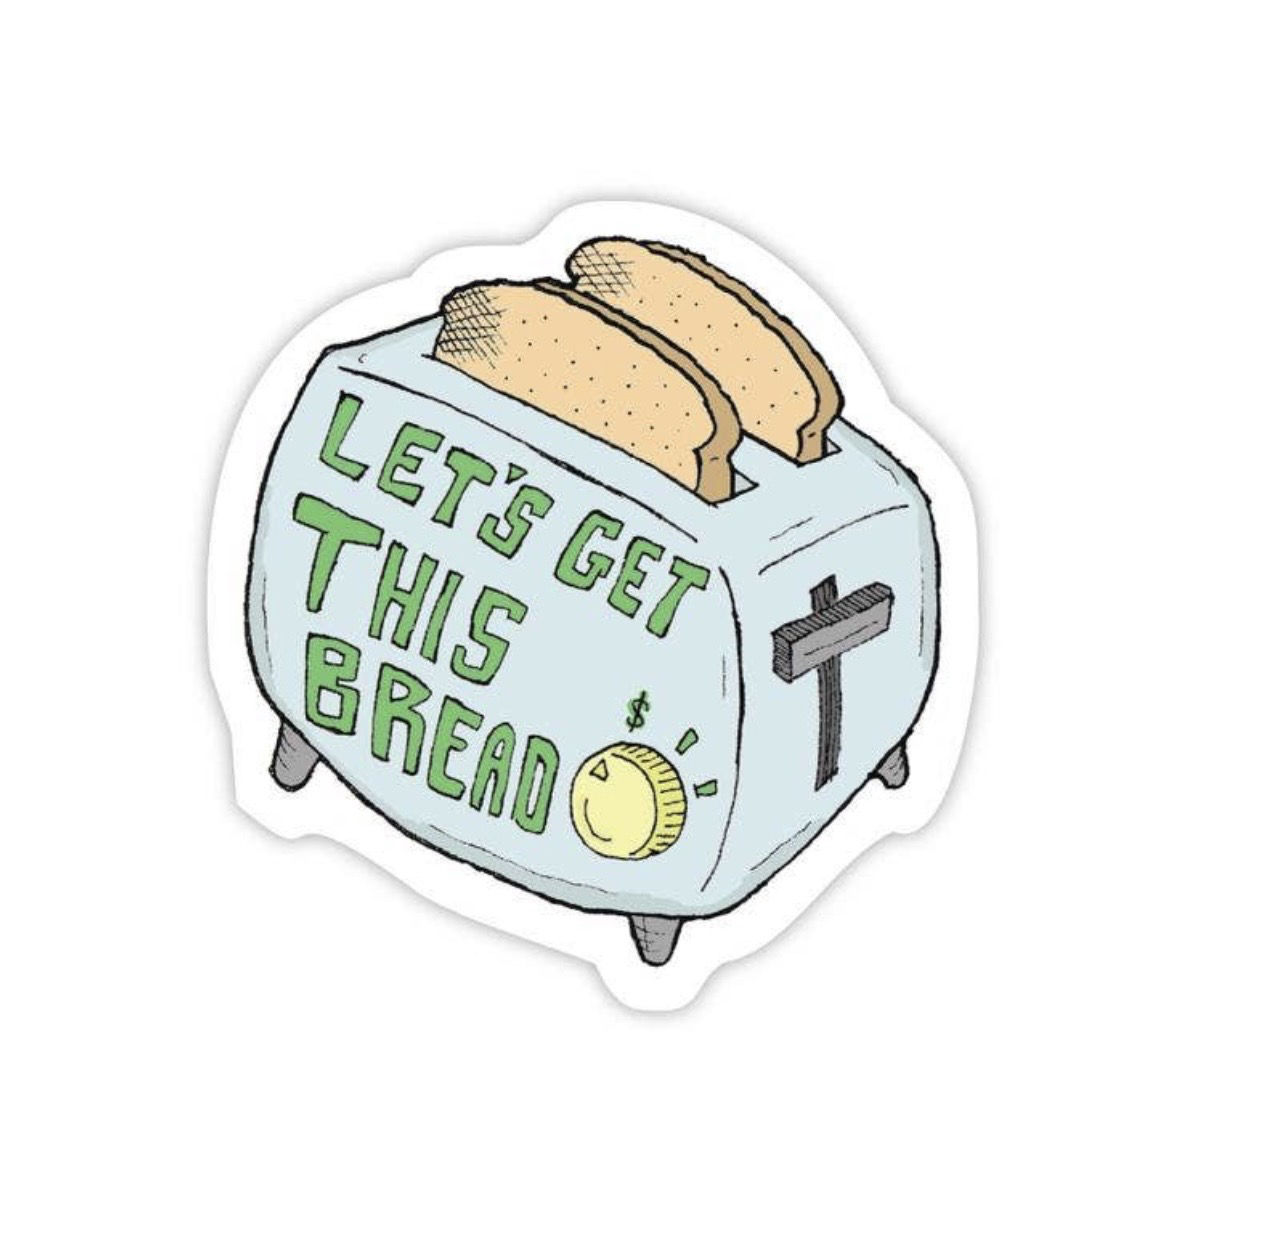 Lets Get This Bread Sticker